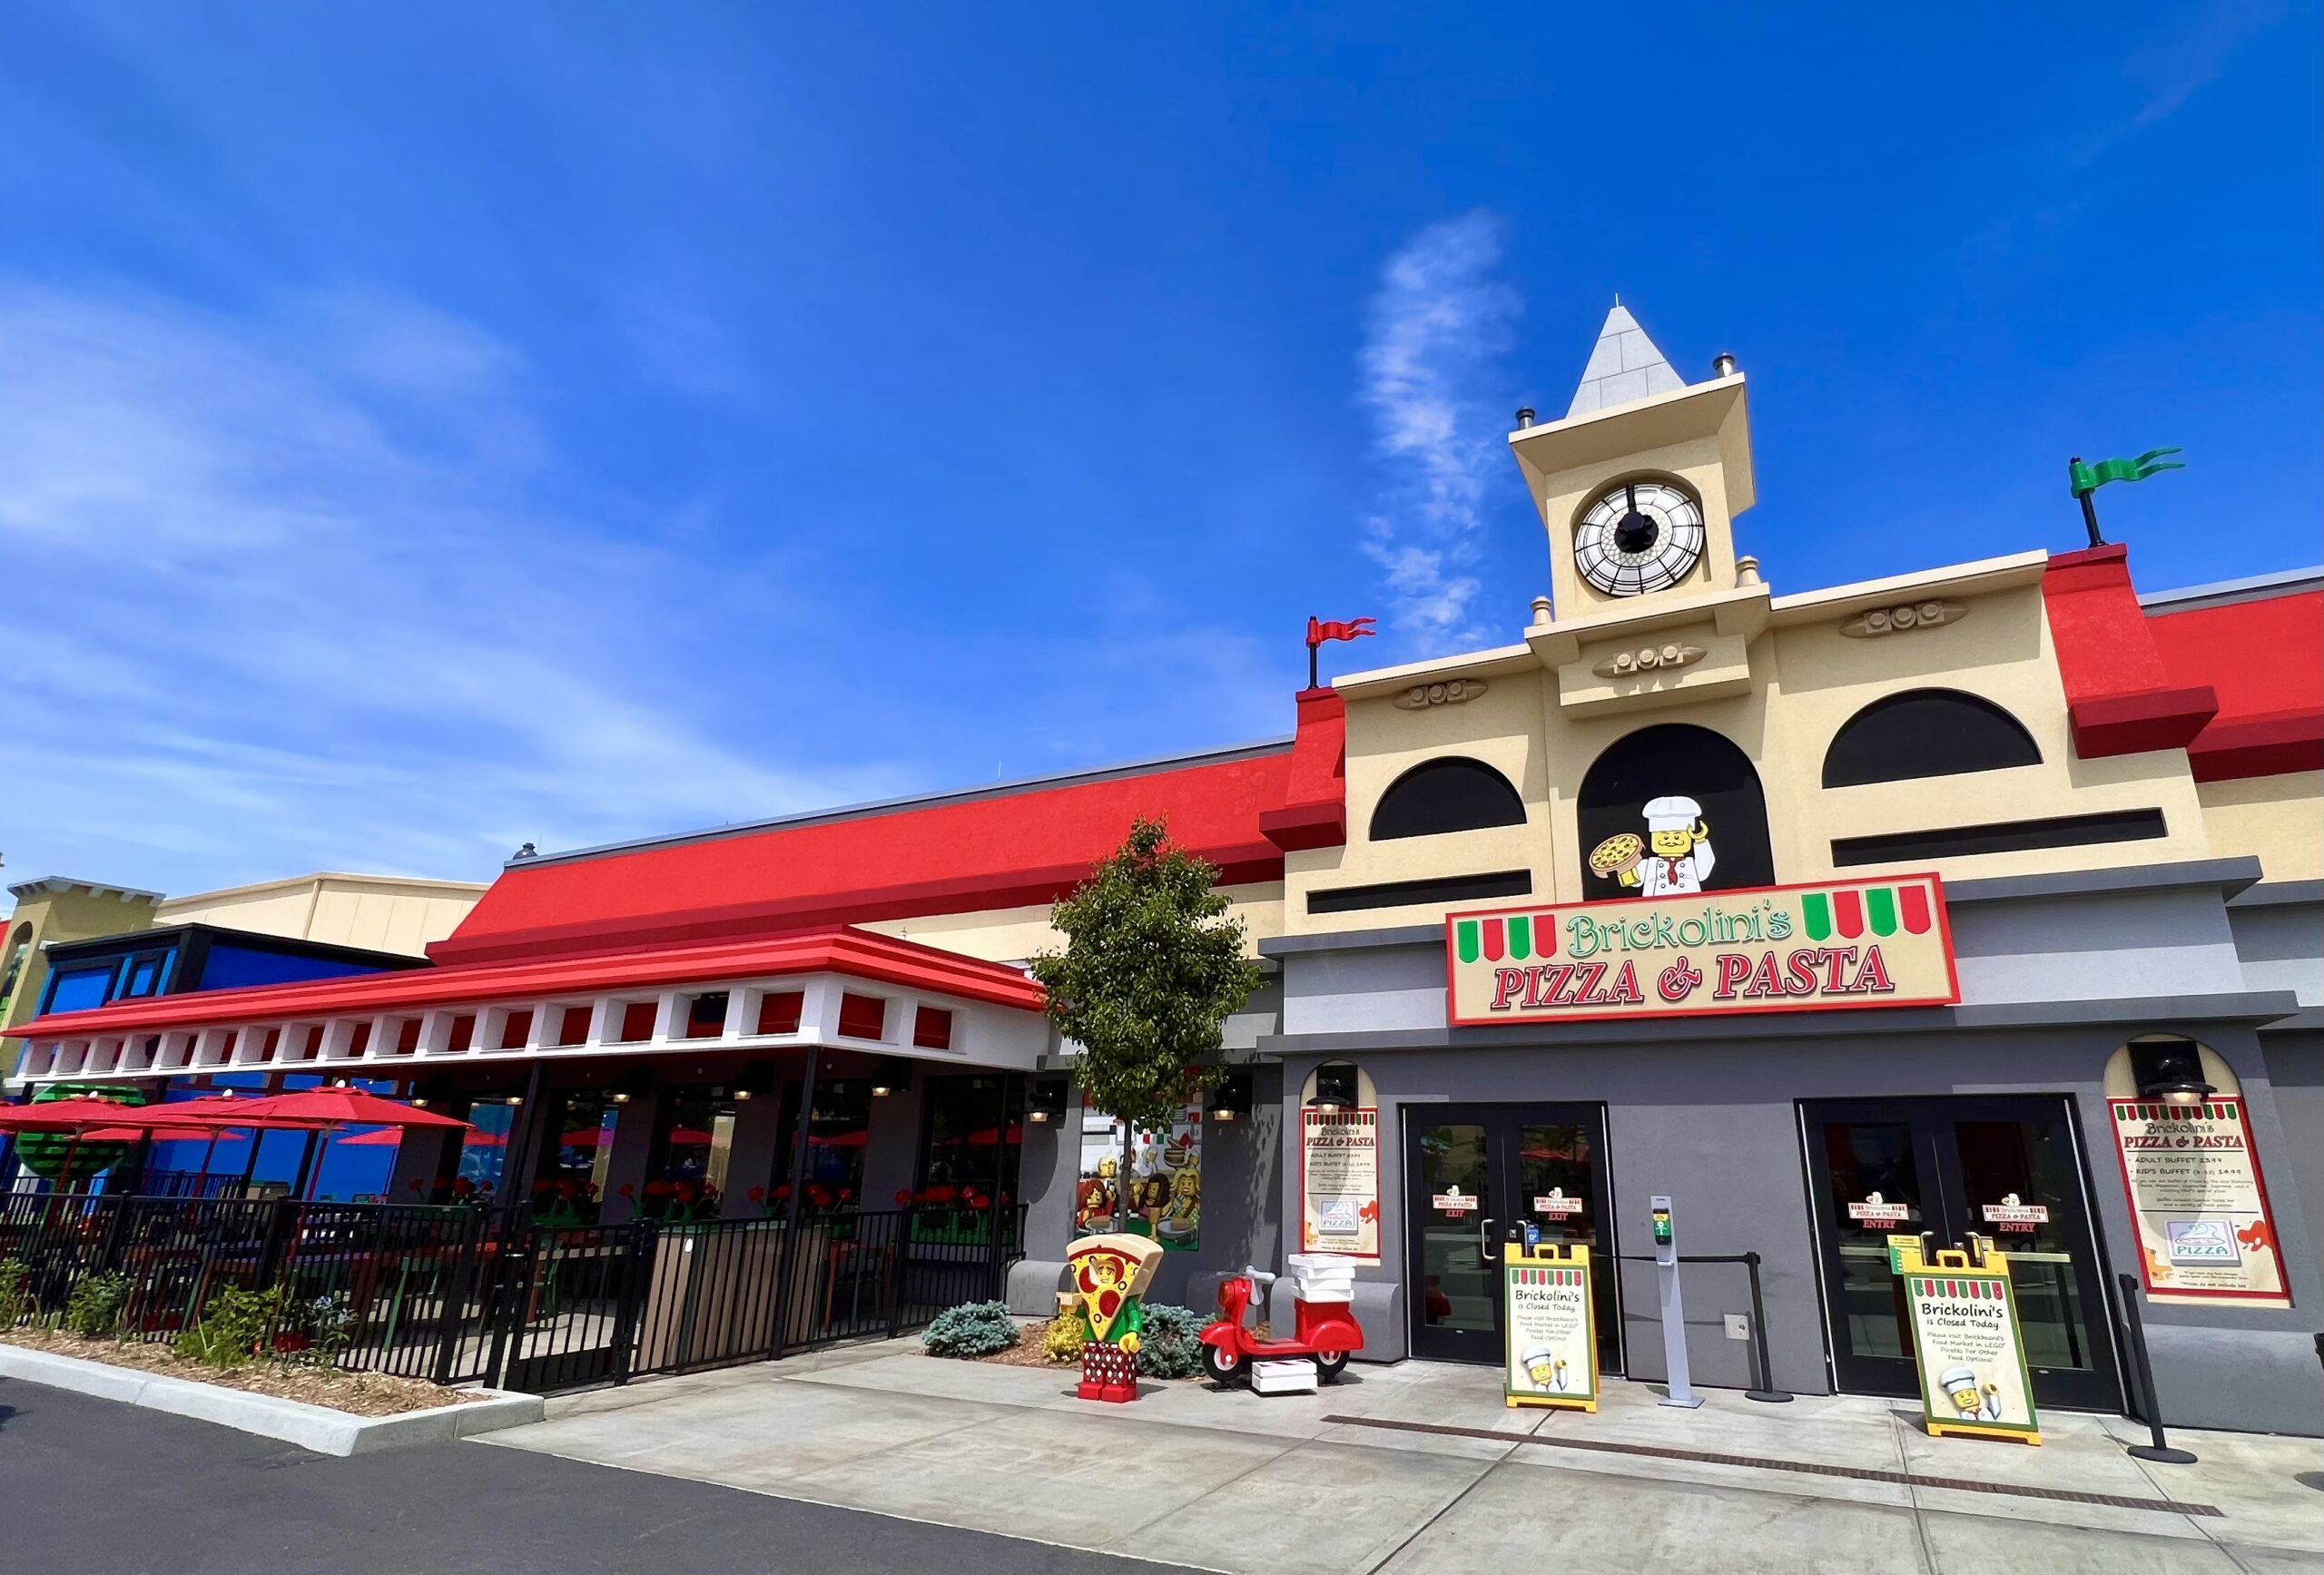 Legoland New York Brickolini's Pizza - Been There Done That with Kids